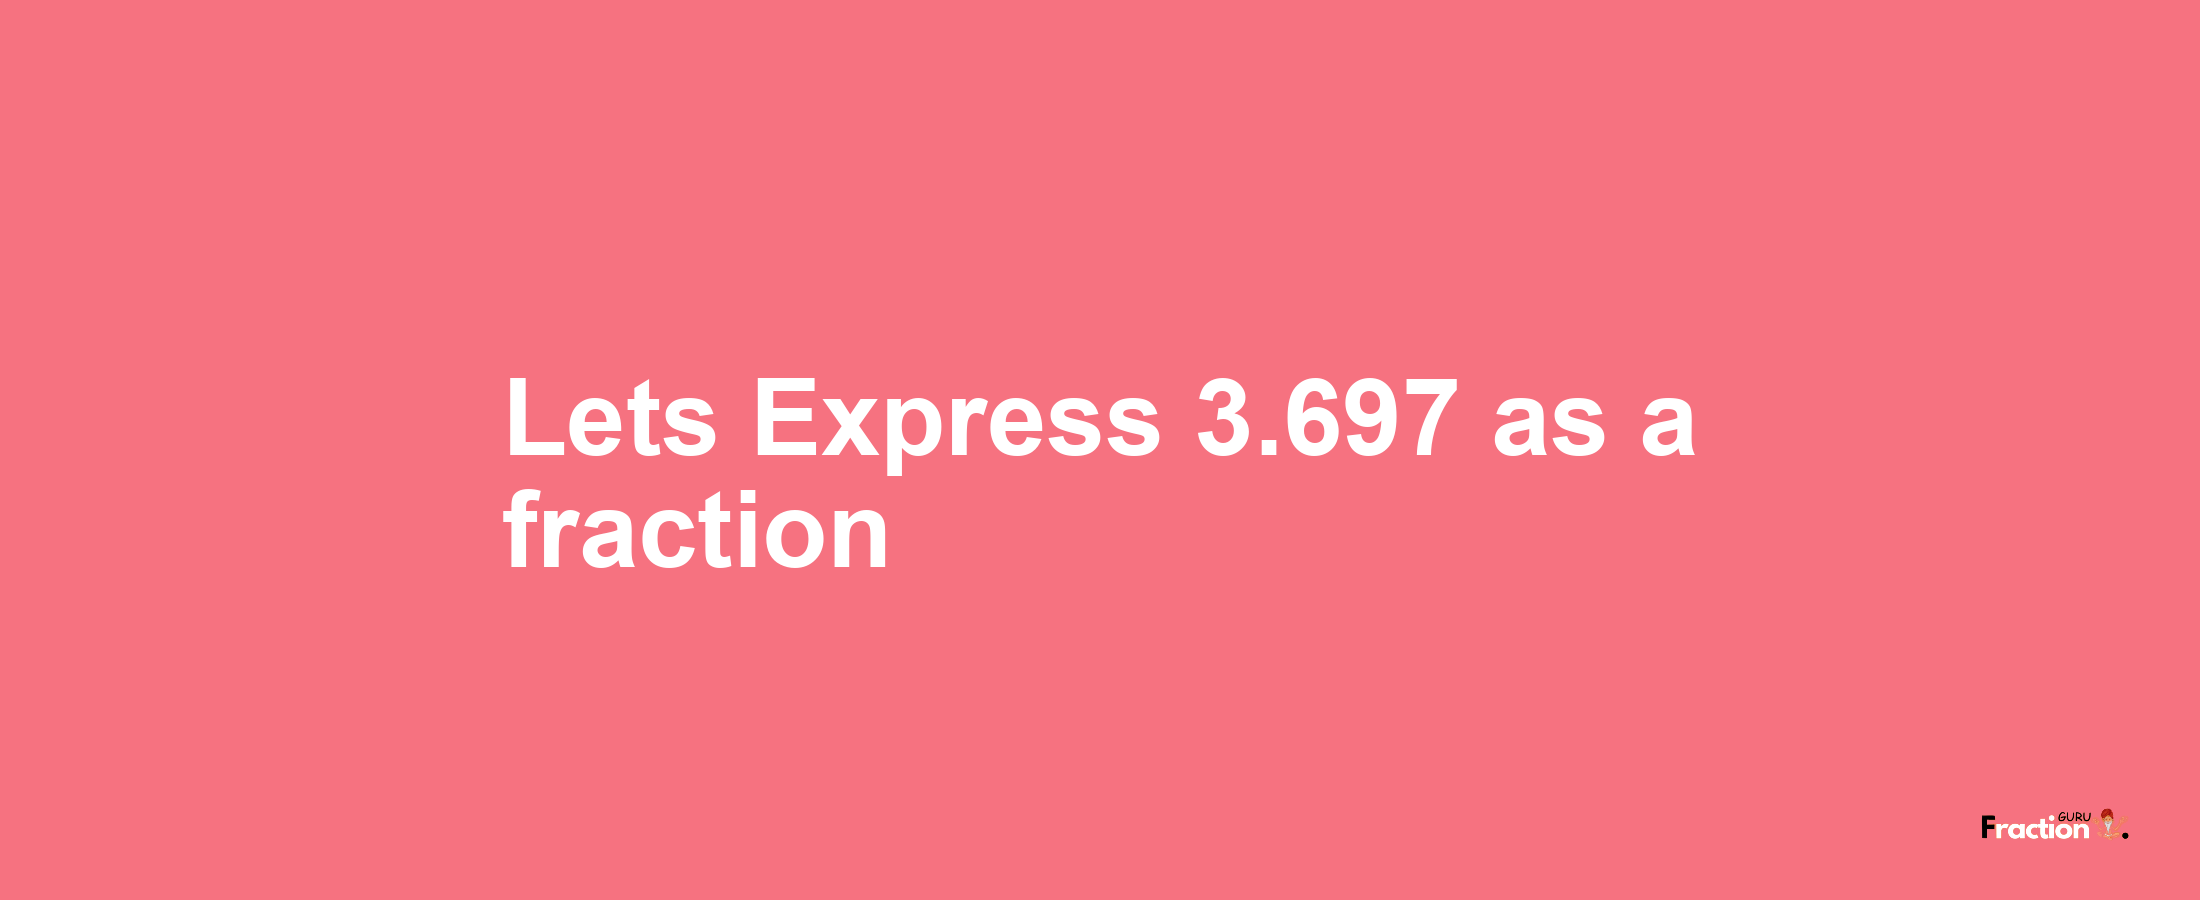 Lets Express 3.697 as afraction